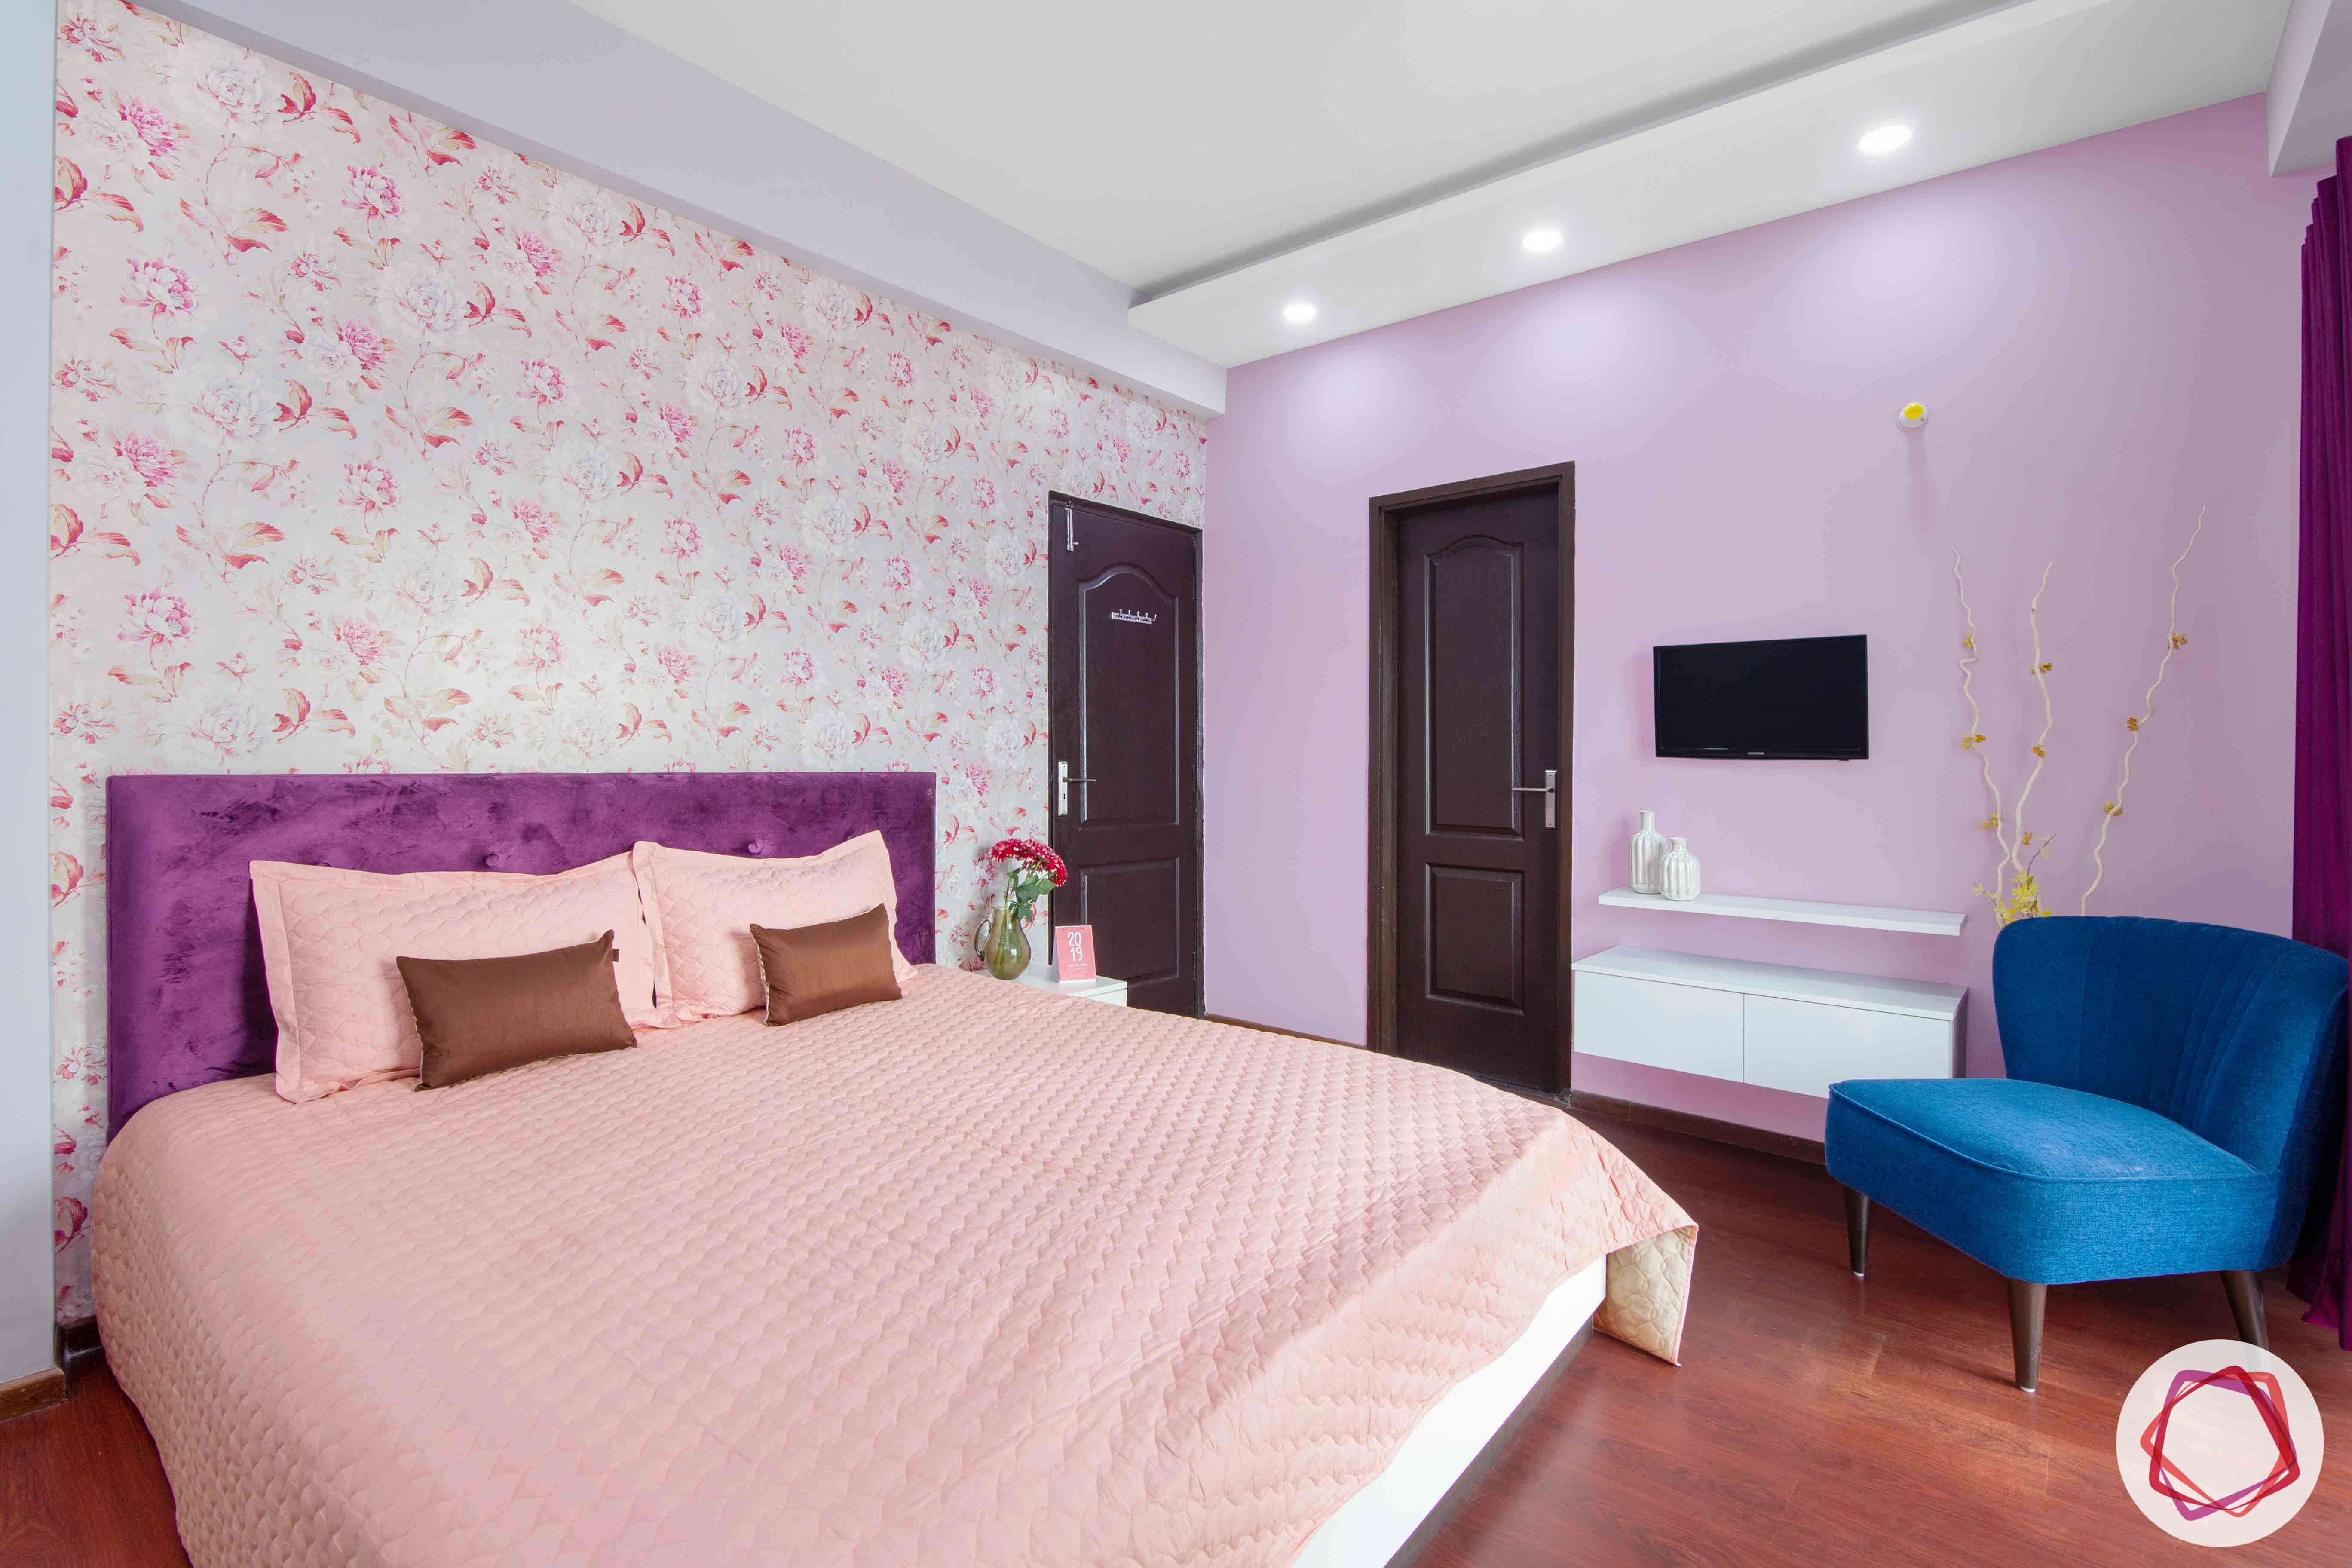 3bhk flat interior design-floral wallpaper designs-lilac wall paint-tv unit for bedroom